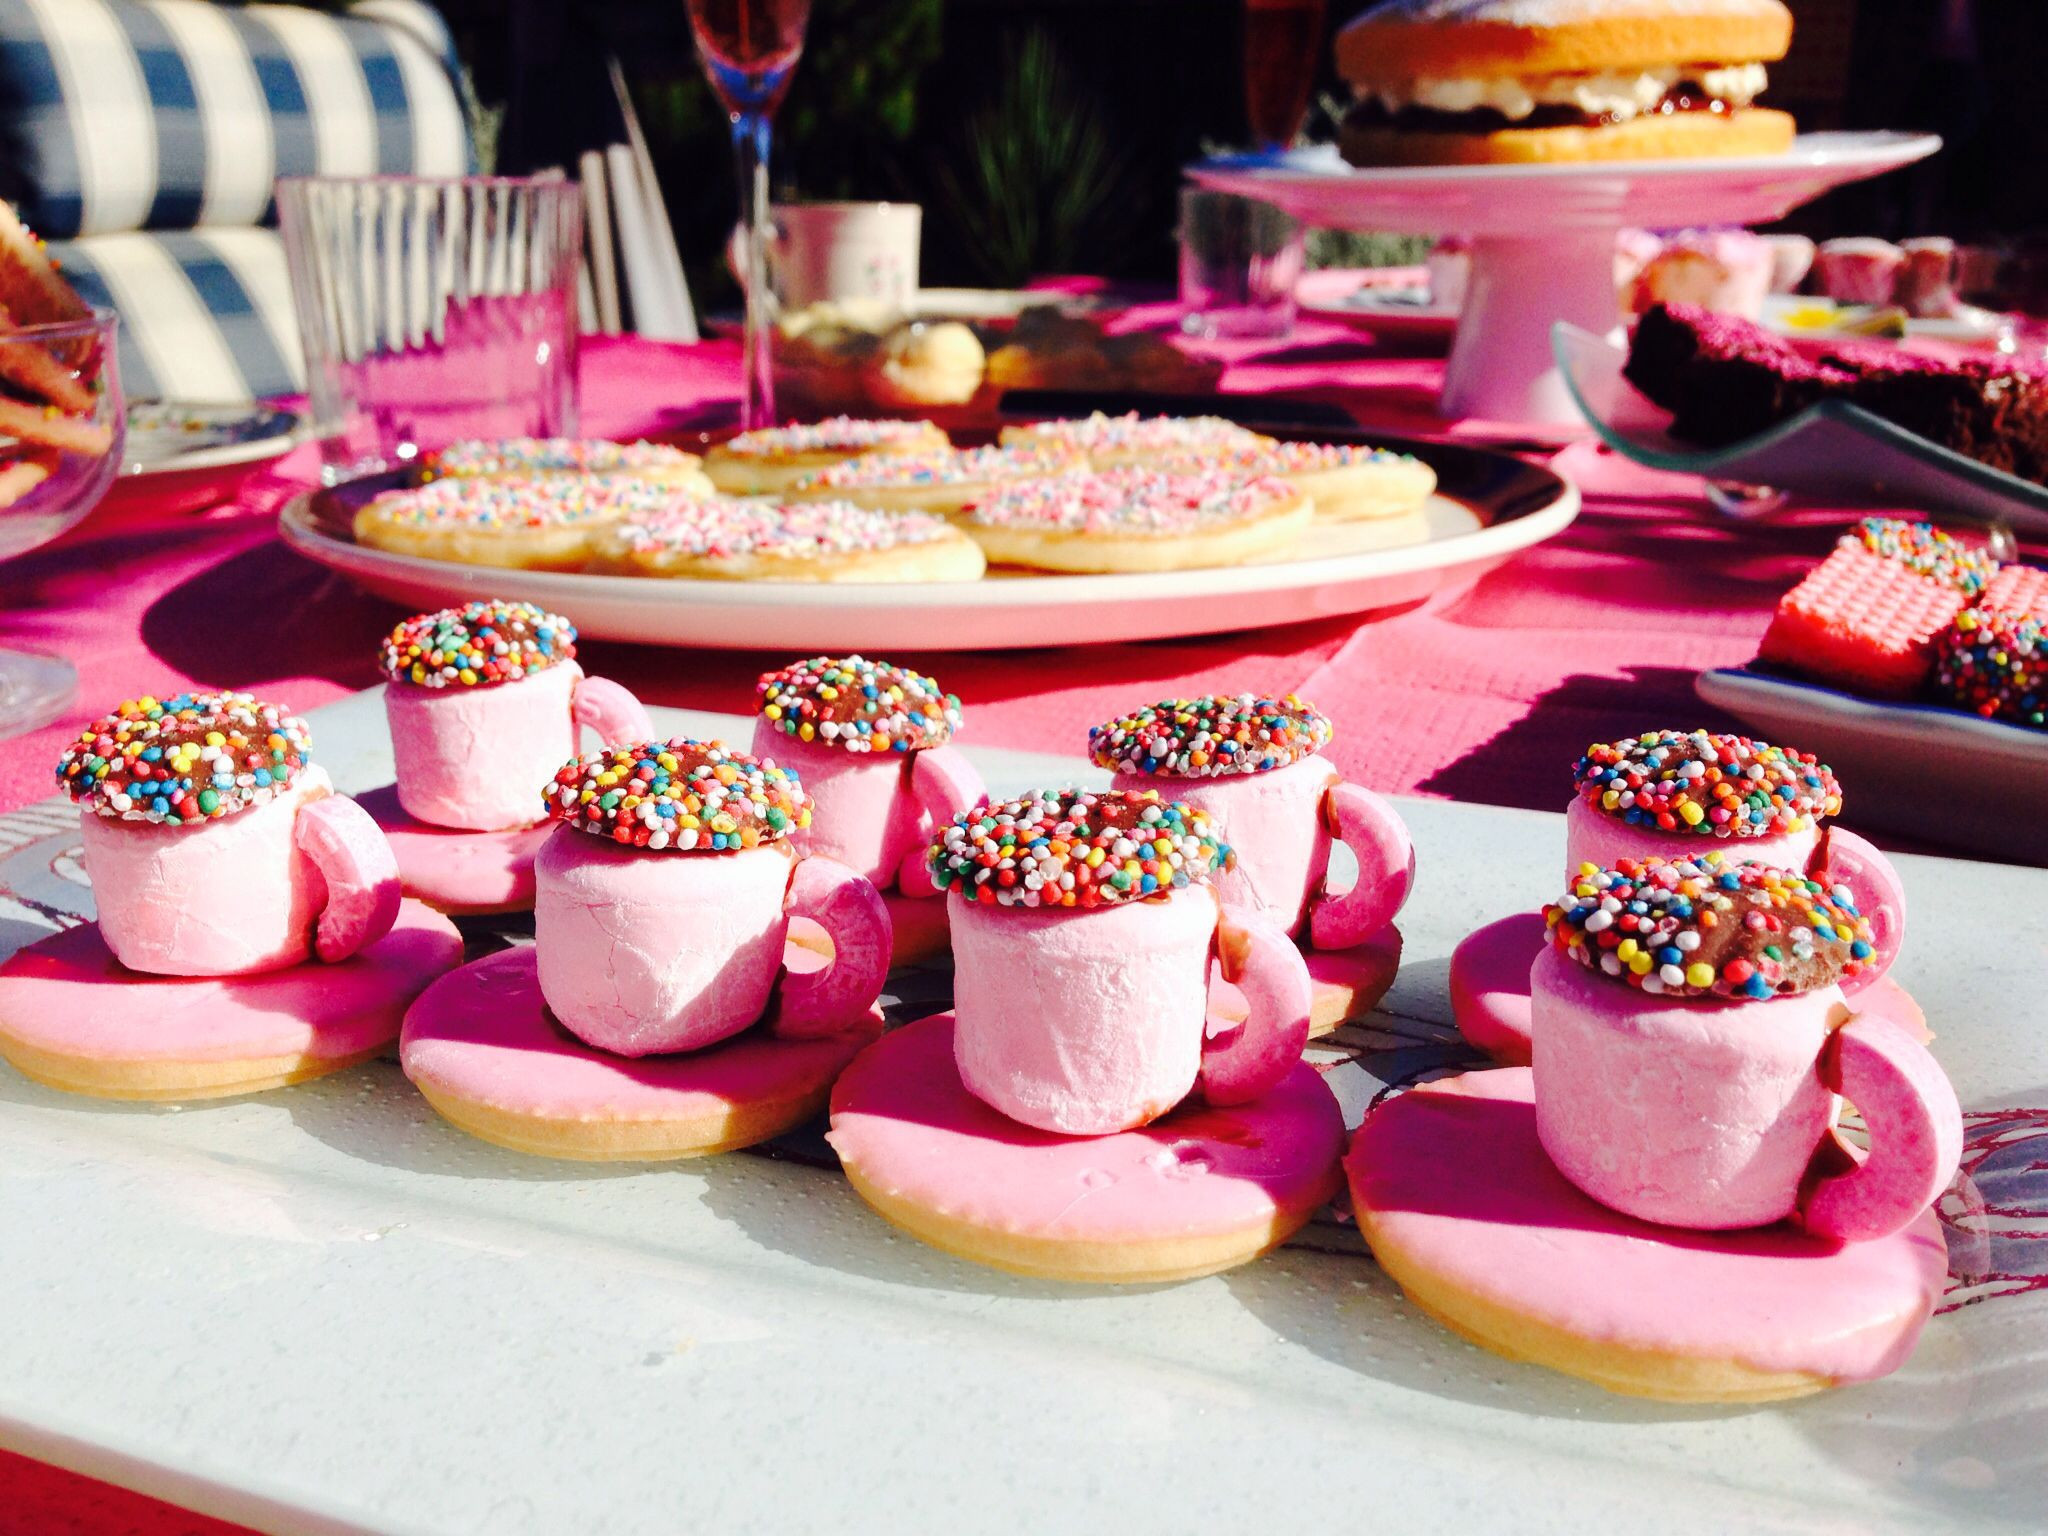 Kitchen Tea Party Food Ideas
 High tea food ideas pink I know who would love this